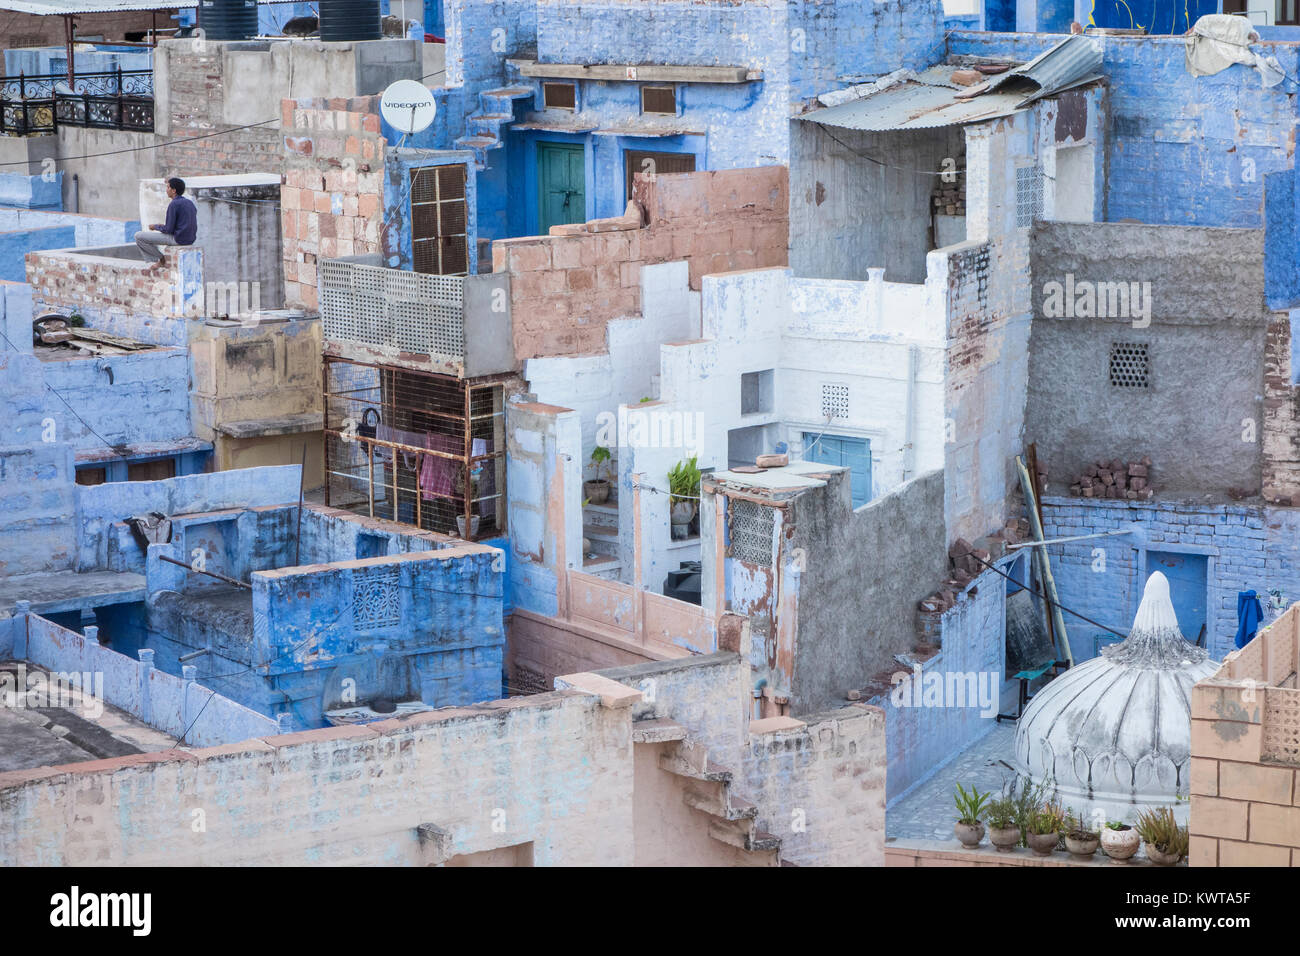 Haphazard jumble of buildings in Jodhpur (the blue city) resemble at times the works of artist MC Escher. Stock Photo